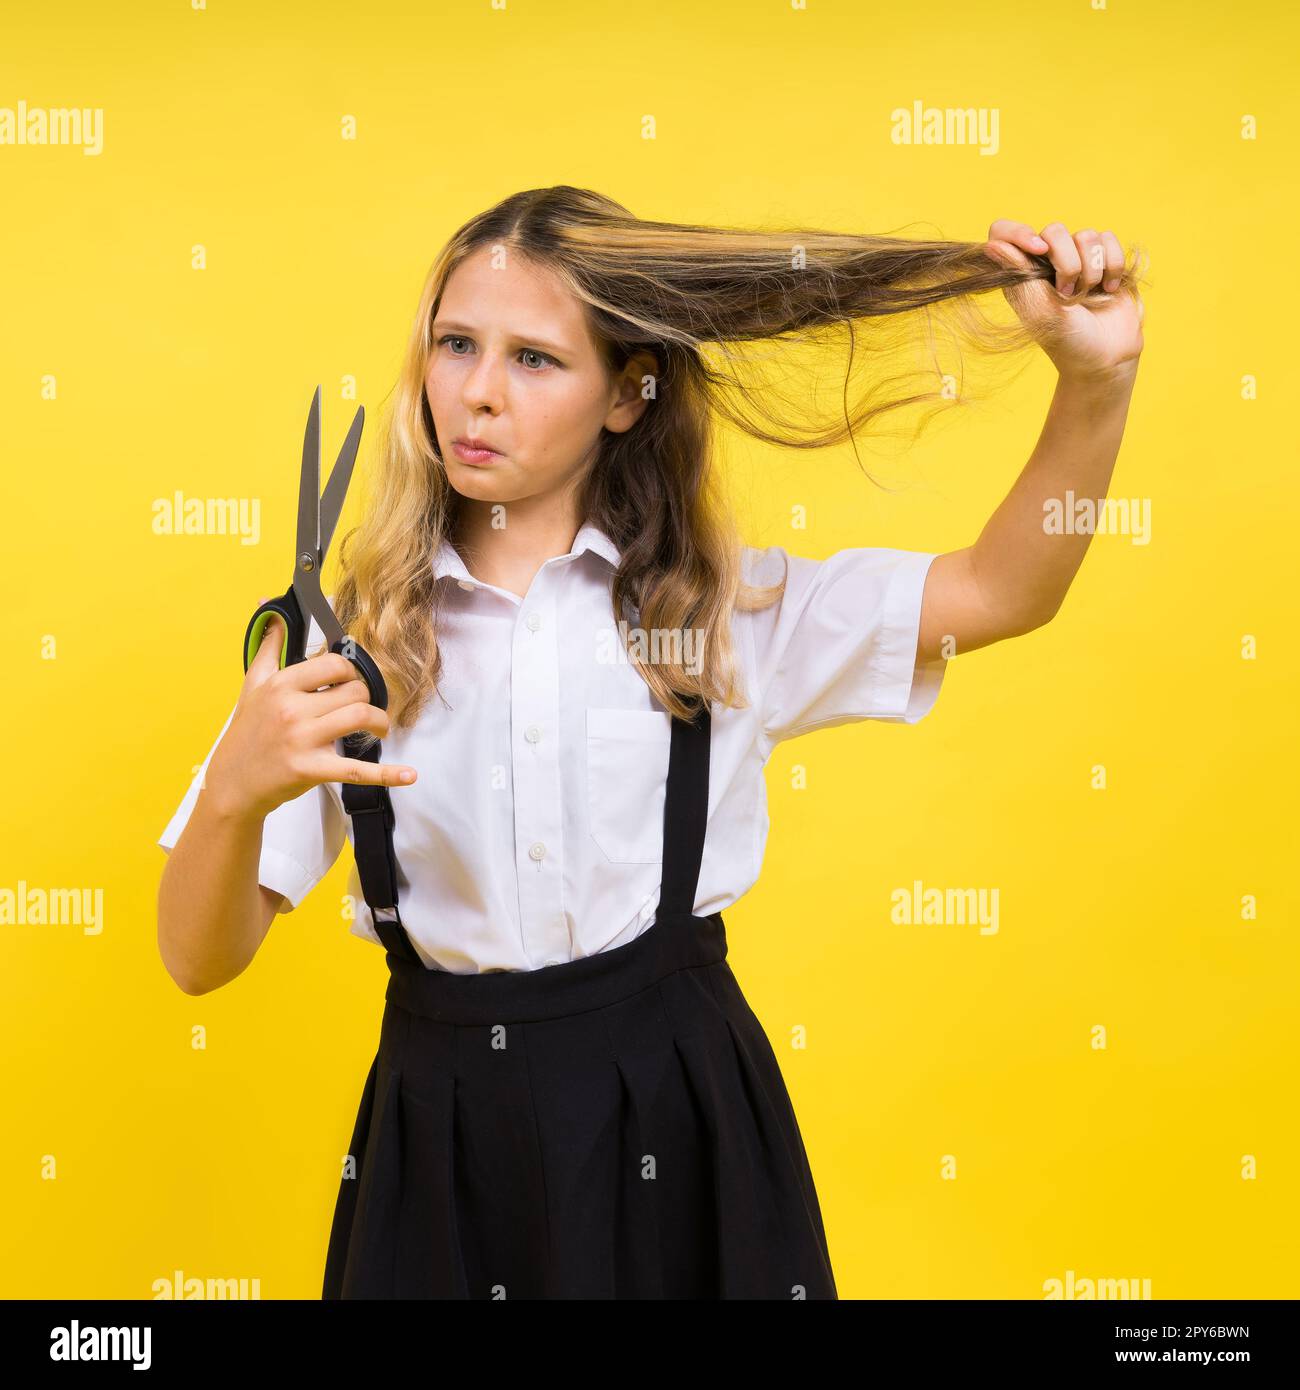 Teenage school girl with scissors, isolated on yellow background. Child creativity, arts and crafts. Stock Photo